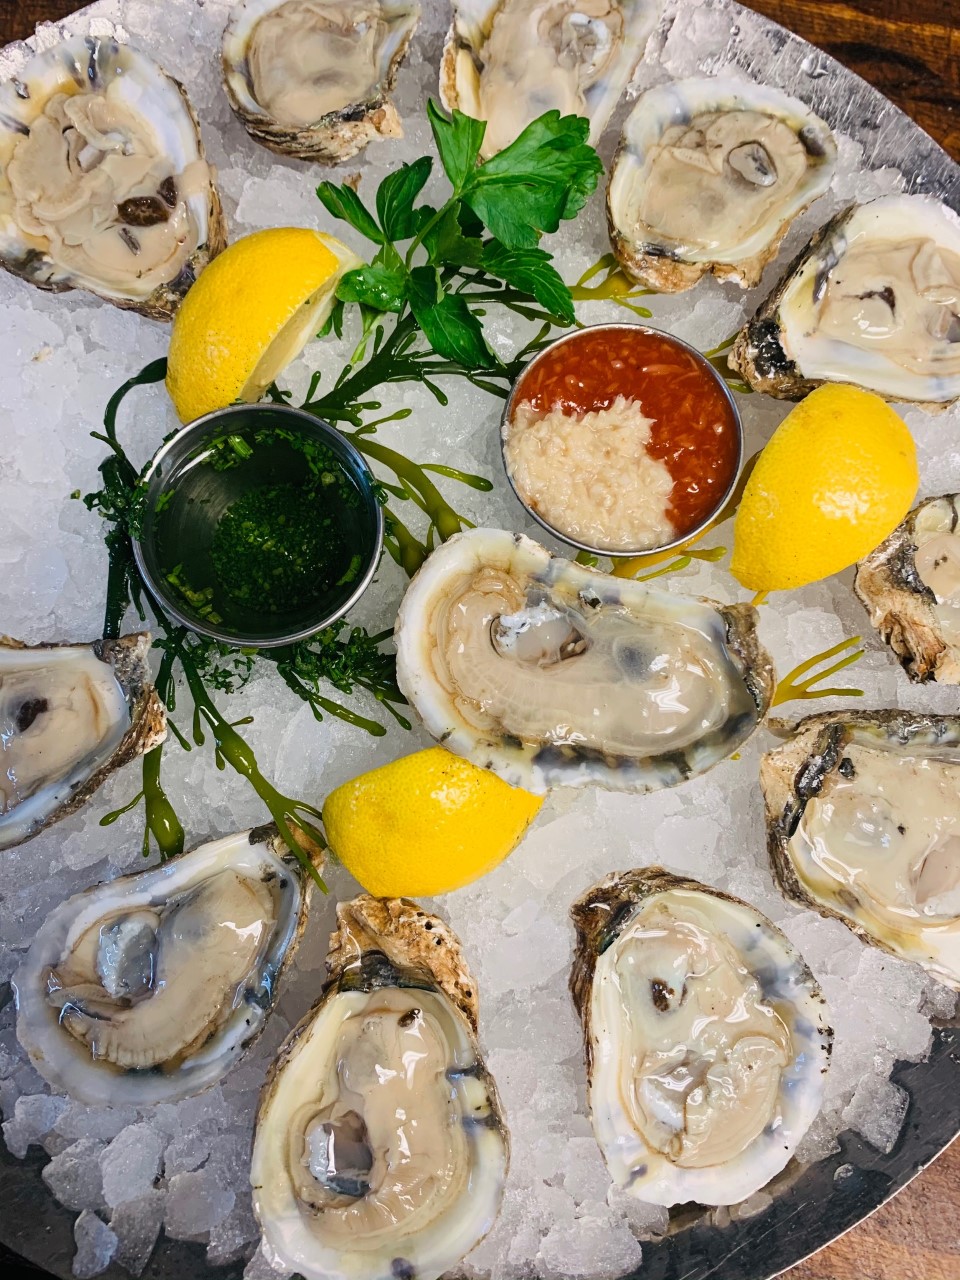 Six Blue Point Long Island Oysters served with cocktail and horseradish sauce and lemon wedges over ice